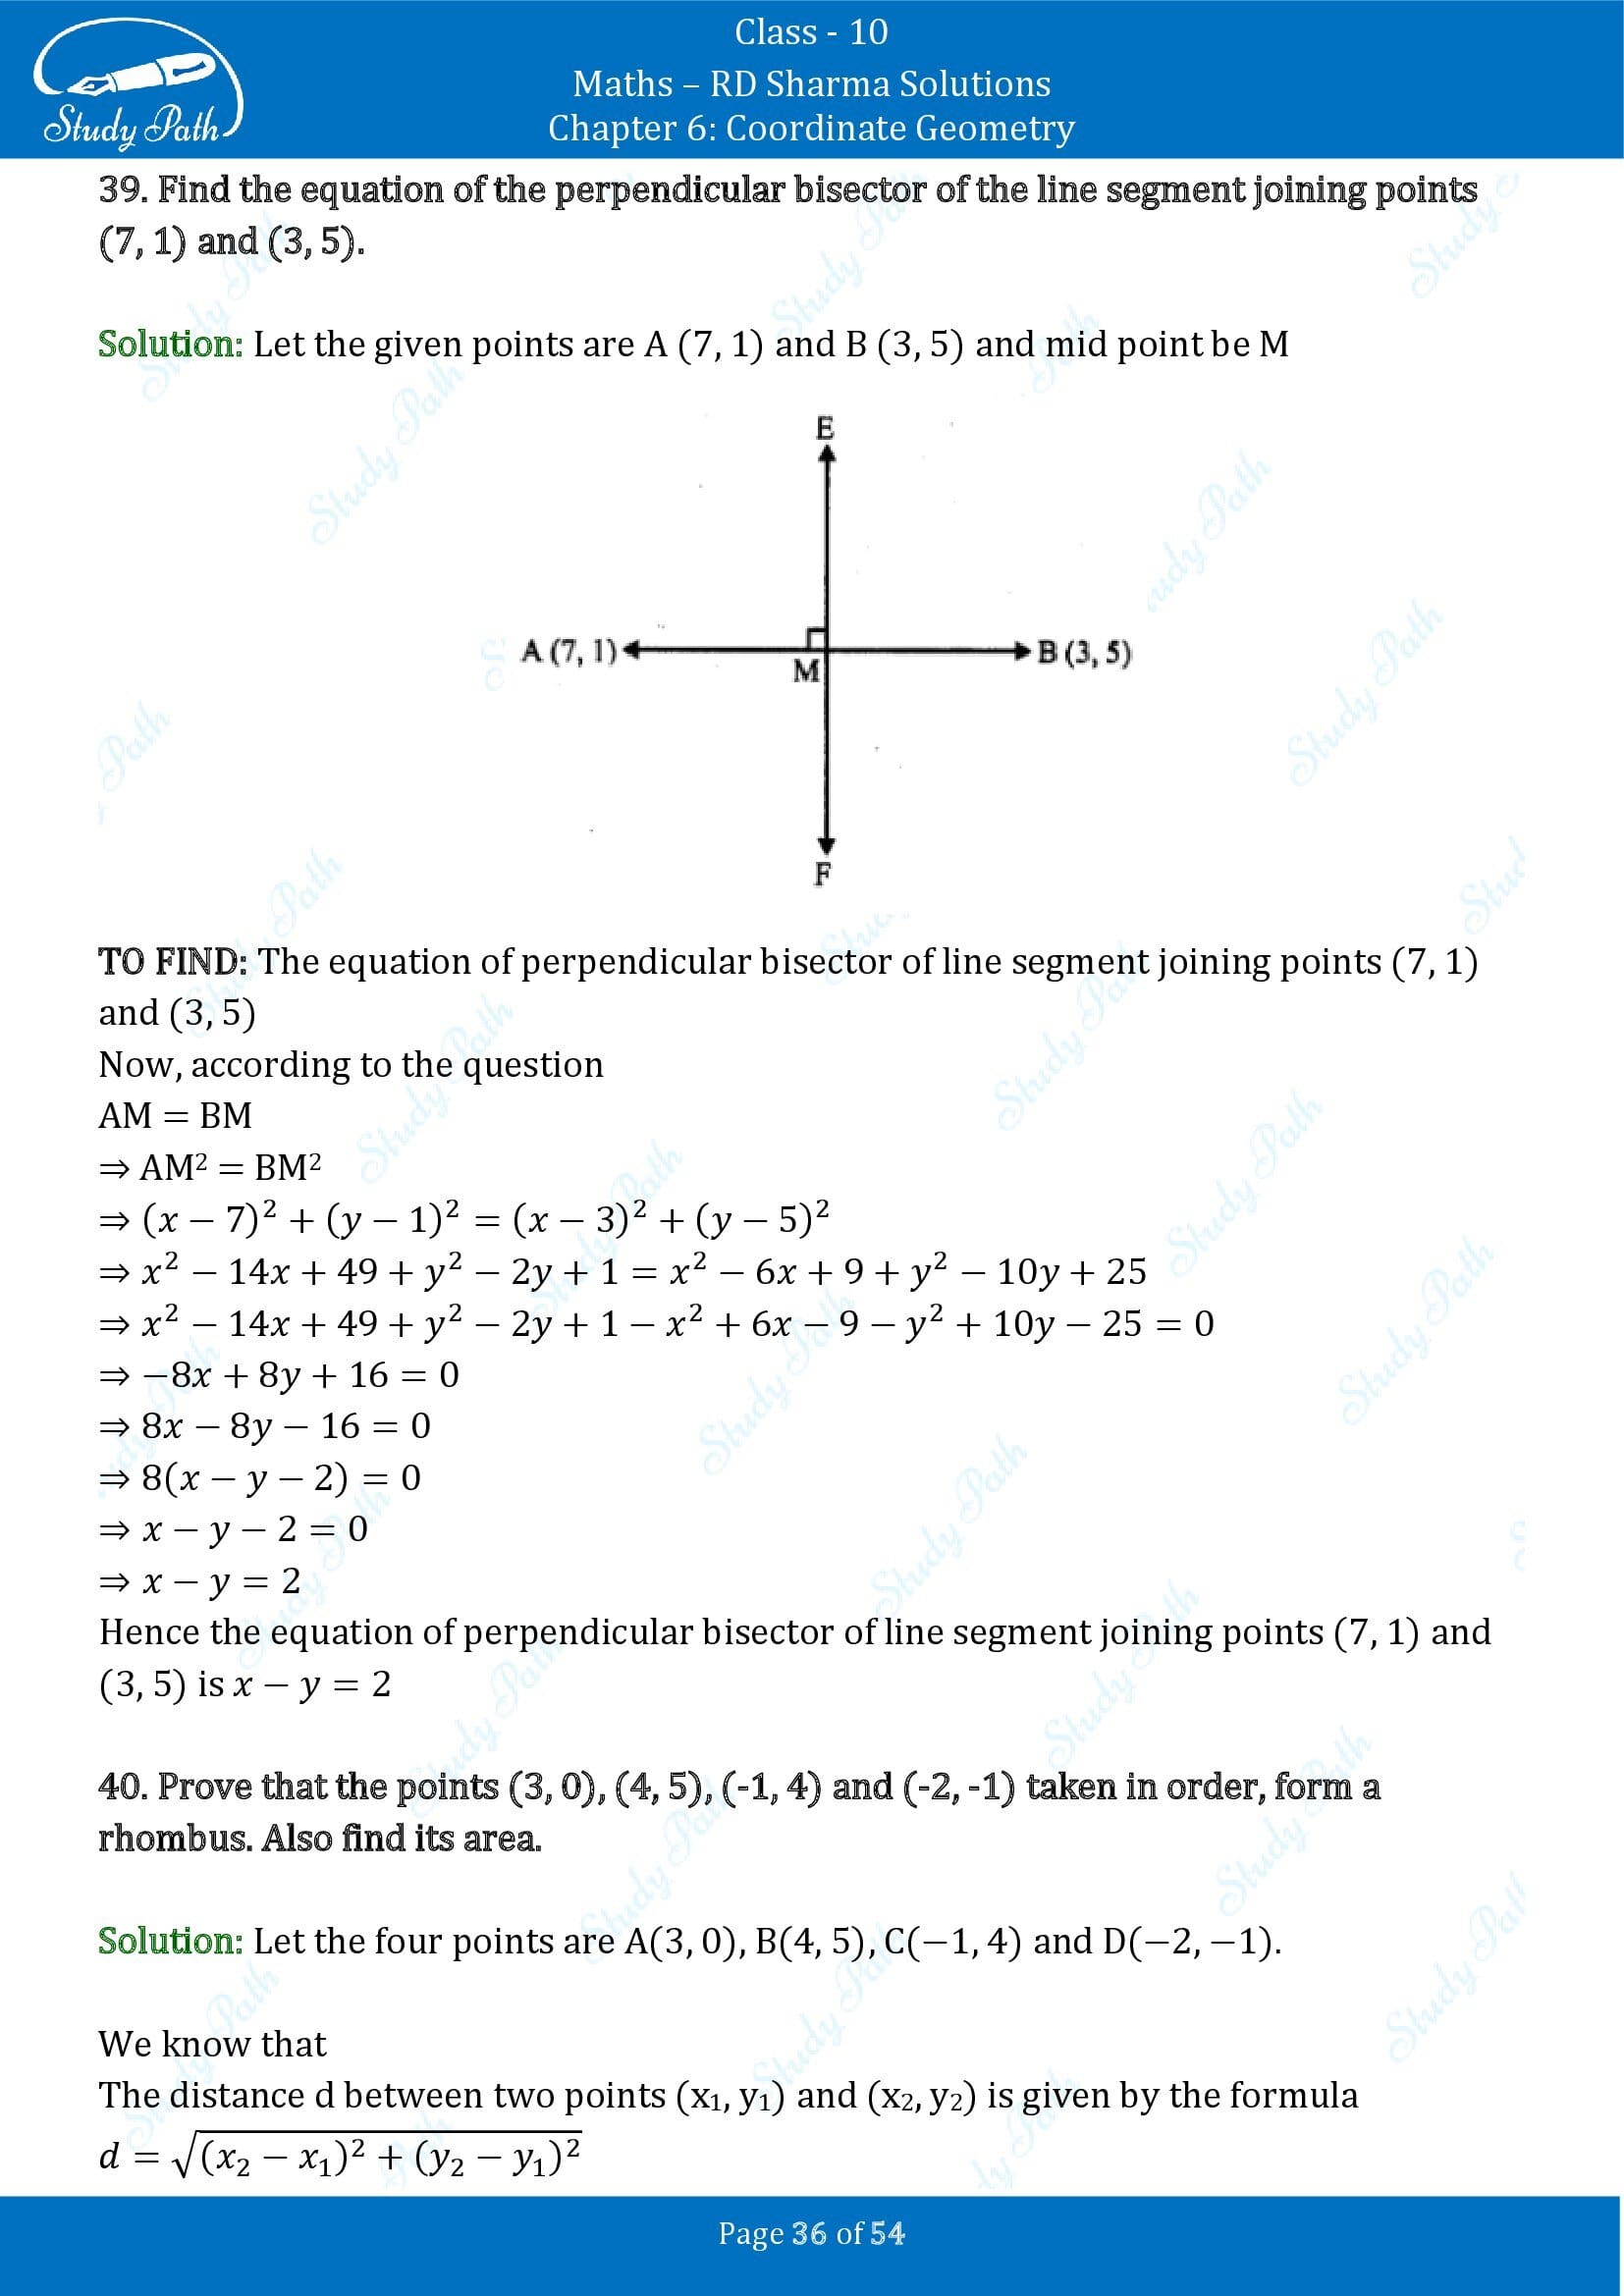 RD Sharma Solutions Class 10 Chapter 6 Coordinate Geometry Exercise 6.2 0036